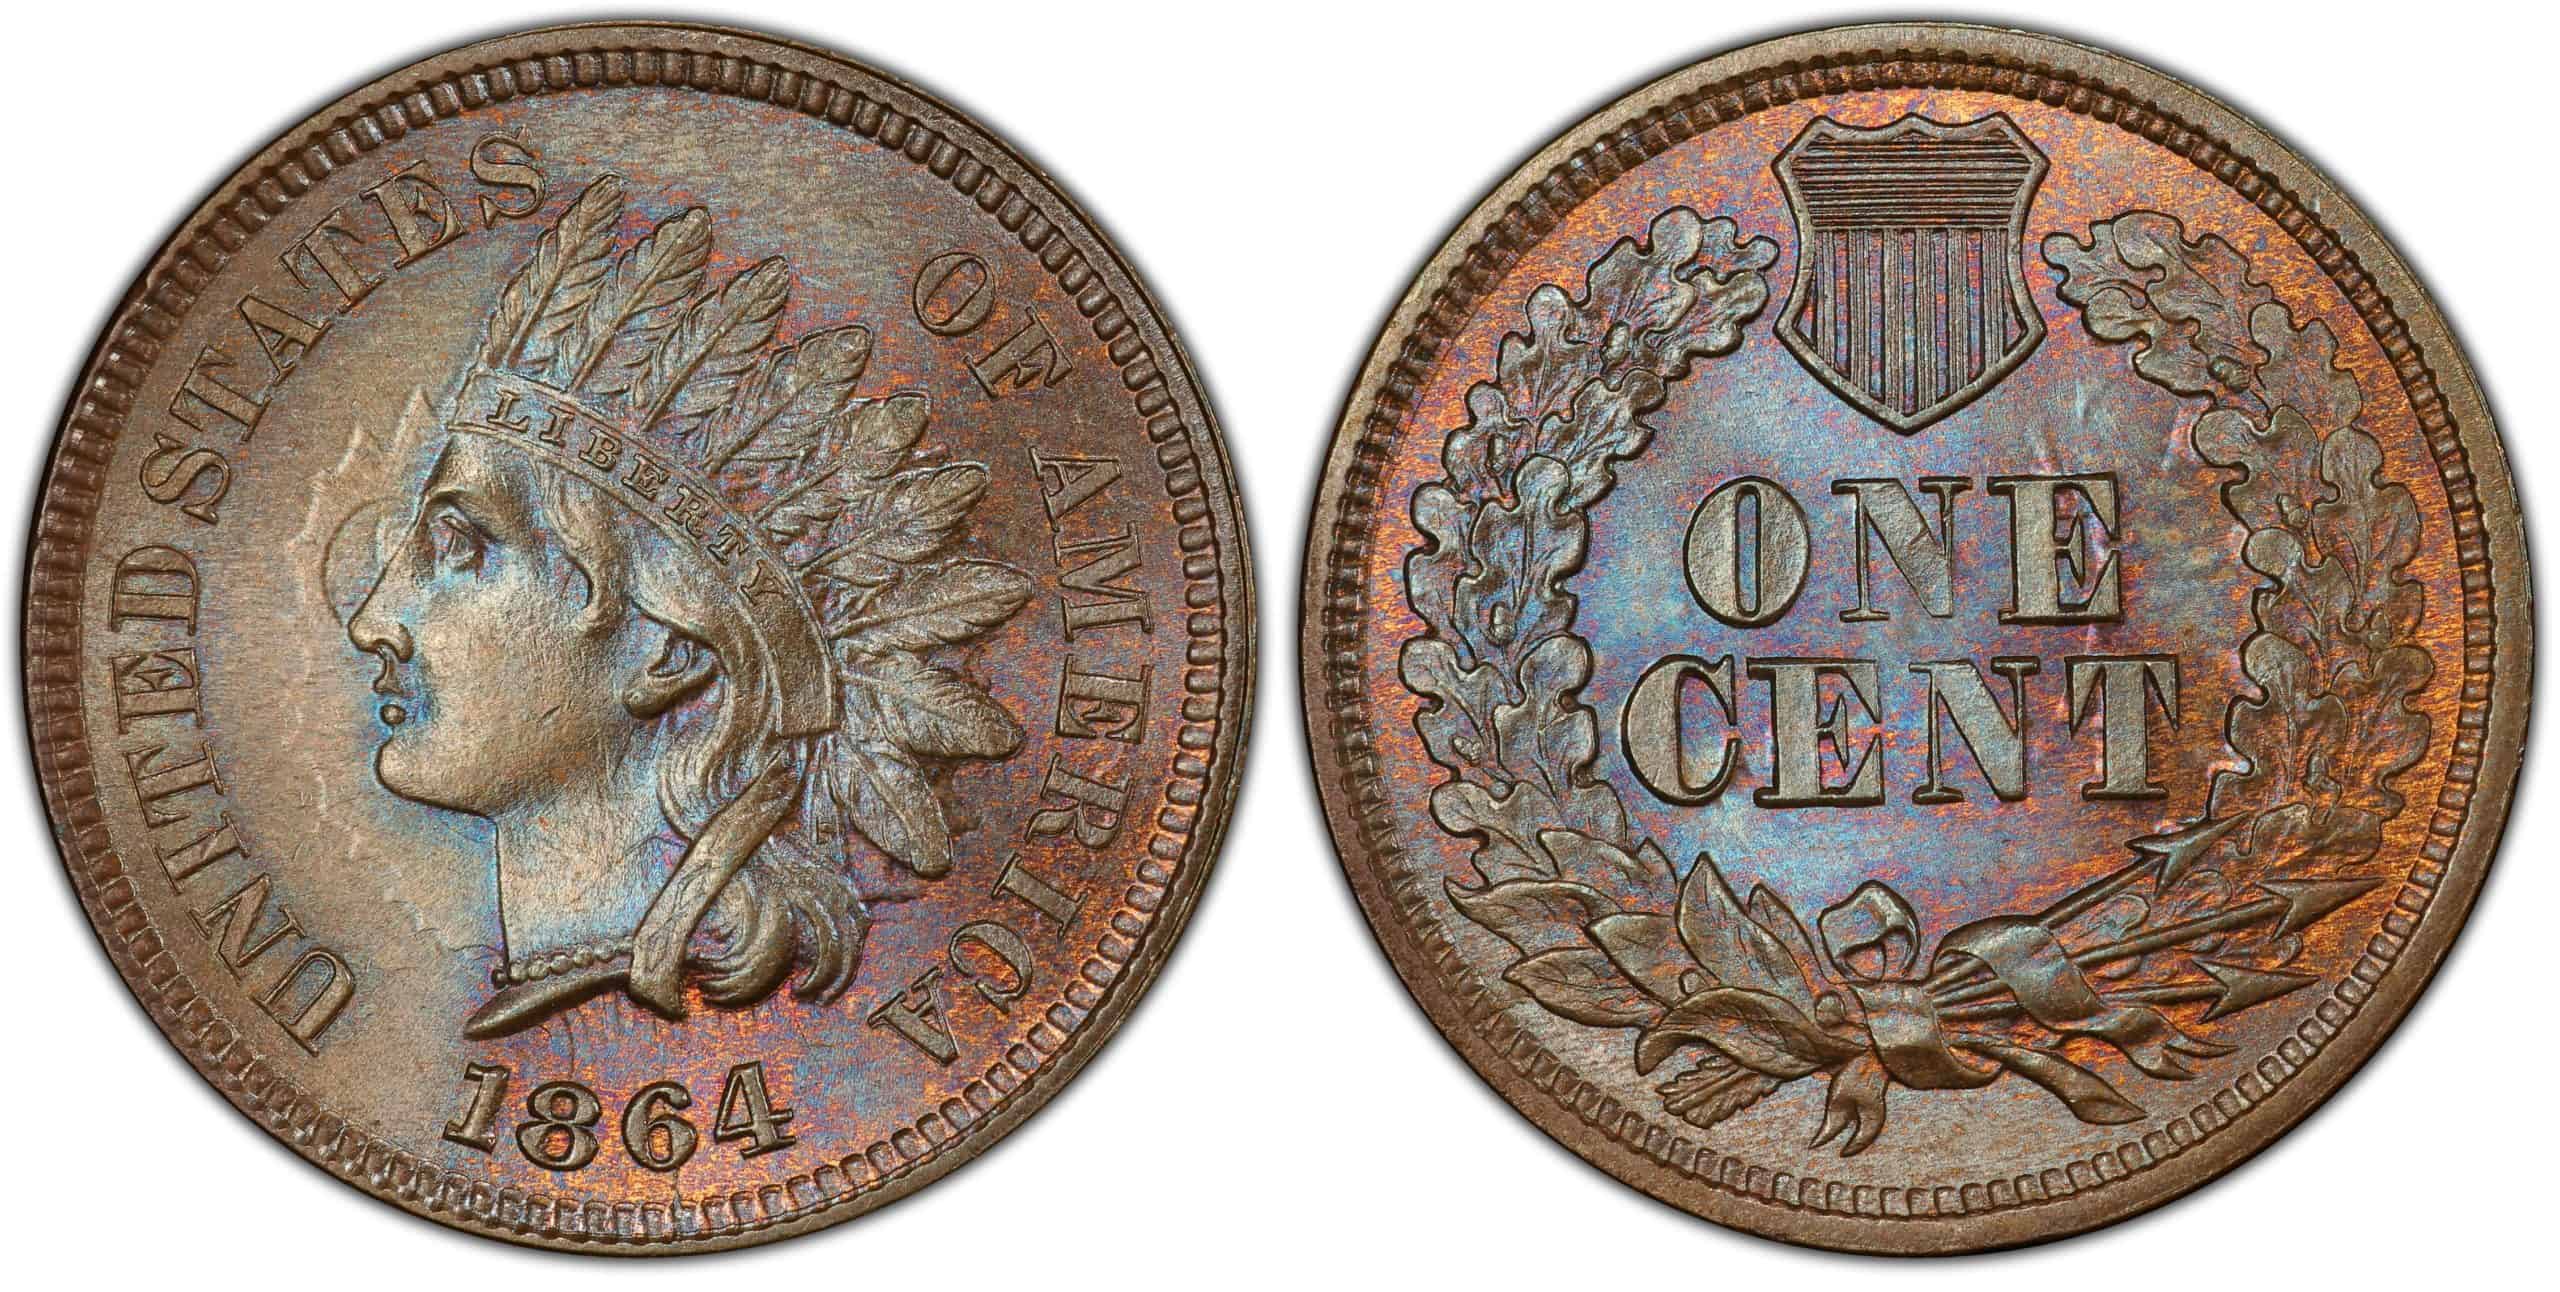 Features of 1864 Indian Head Penny